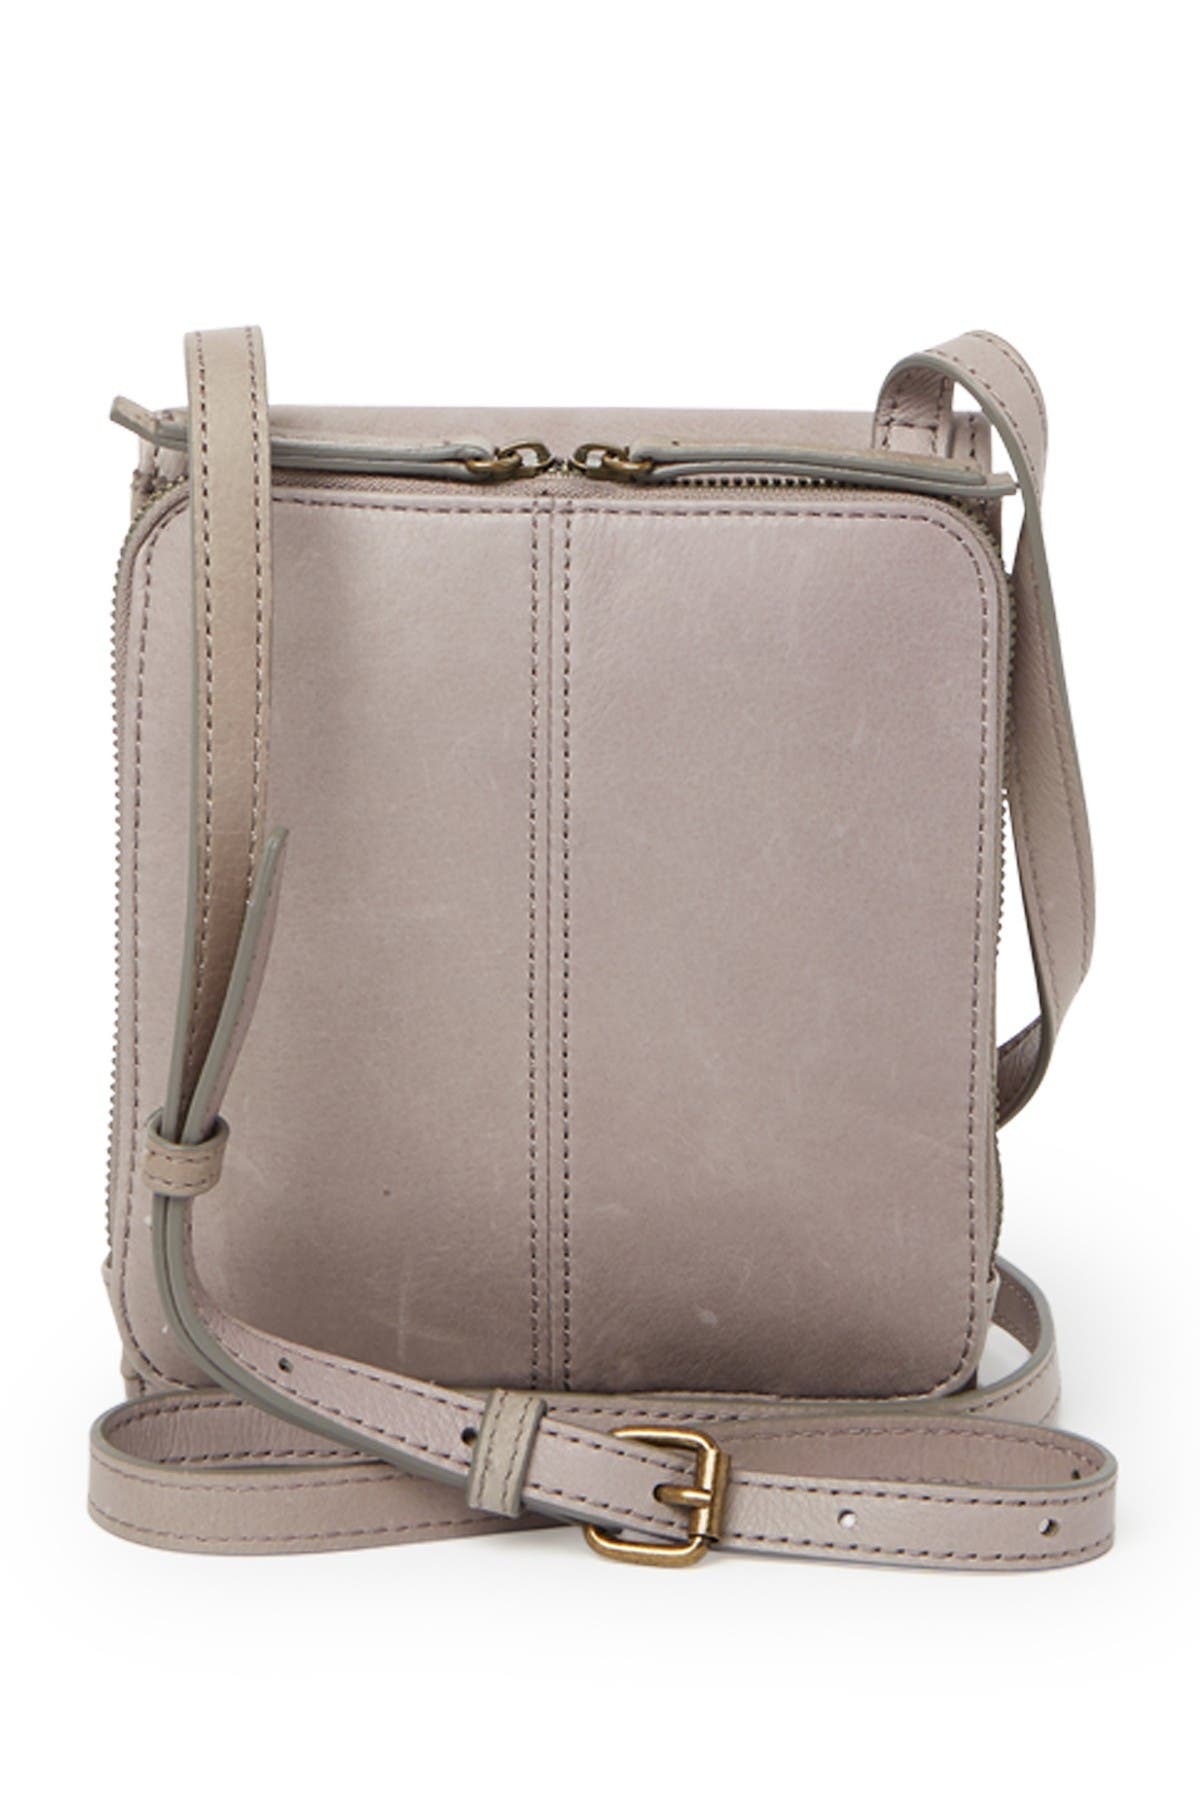 American Leather Co. Kansas Colorblock Crossbody Leather Bag In Ash Grey Smooth